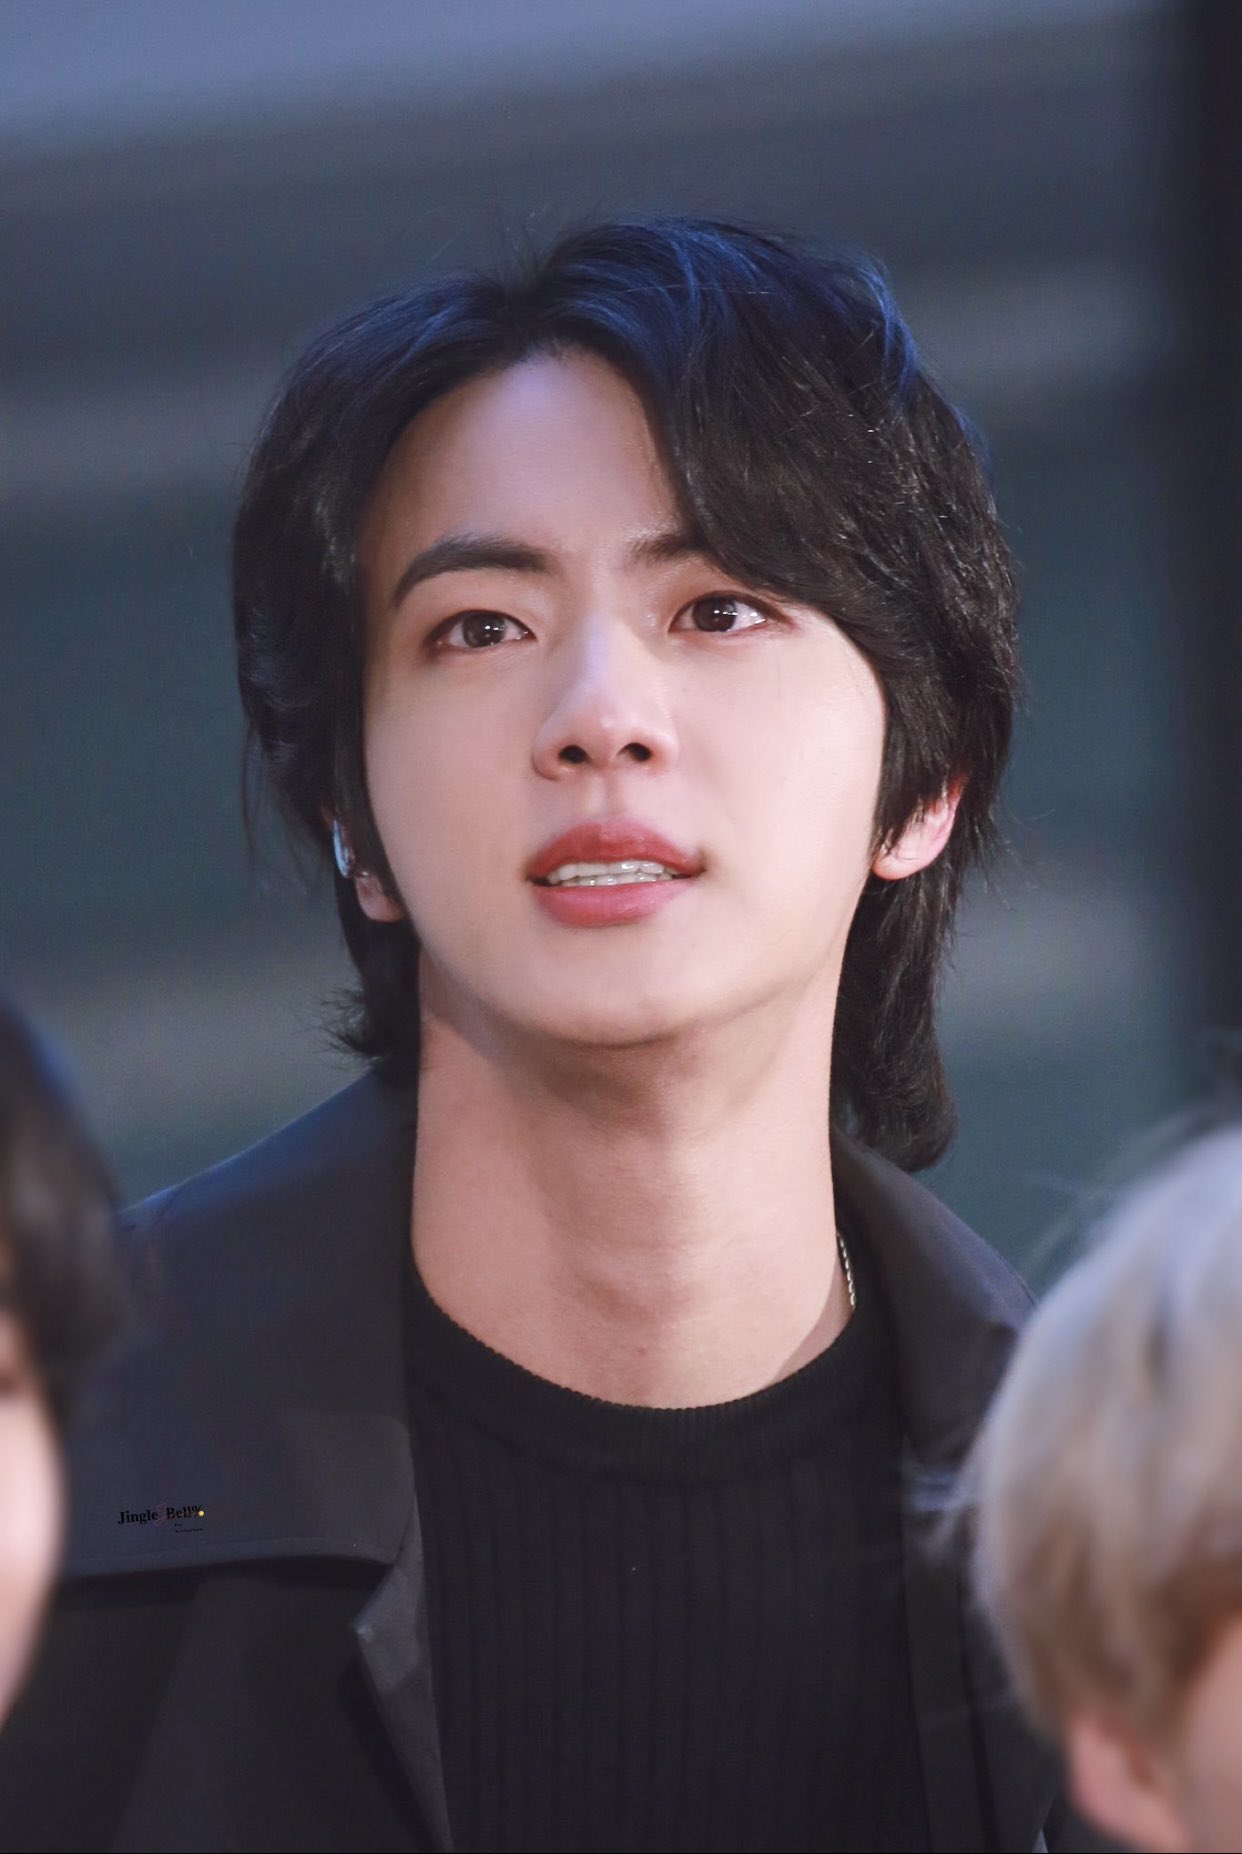 All for Jin on X: [#JinUpdate] KMedia said BTS Jin showed his forehead  & looked like a 'Disney Prince'. Even tho he prefers hairstyles w/  bangs, this time he showed his forehead